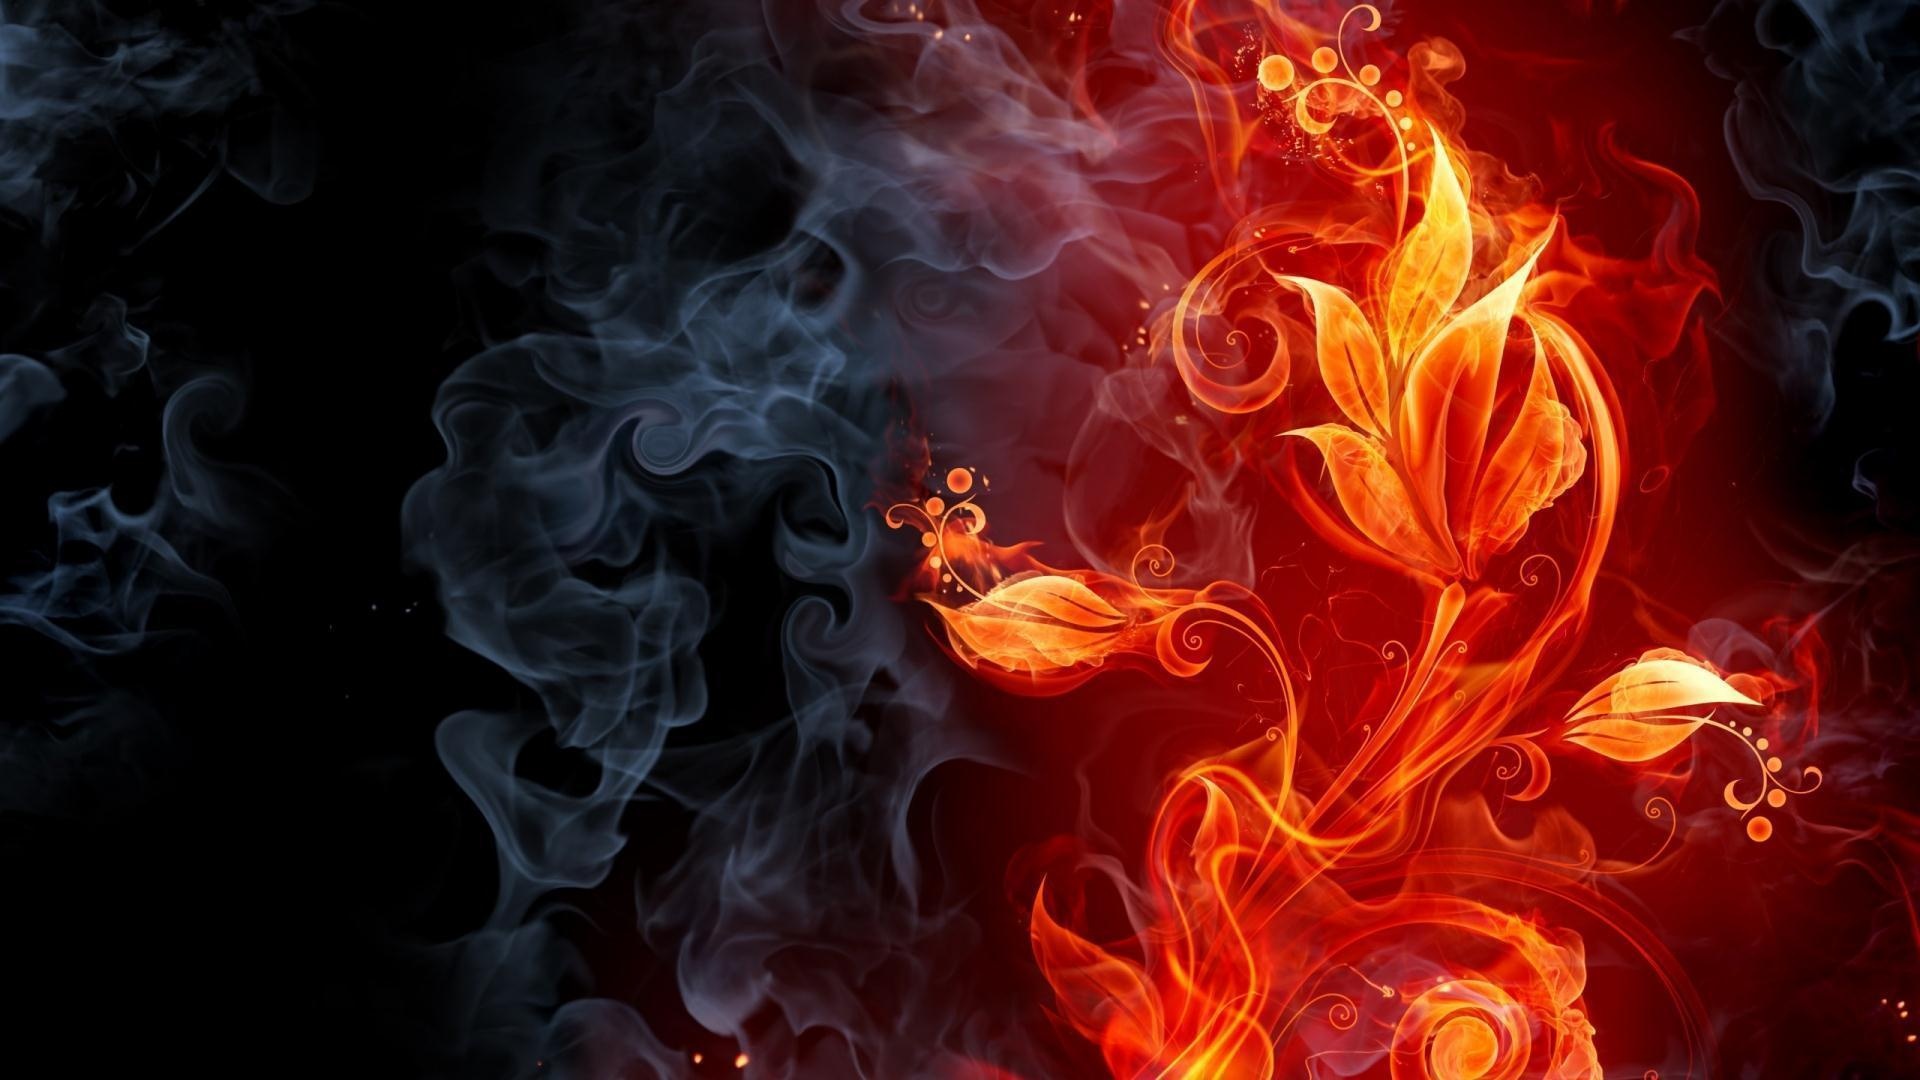 Fiery wallpaper gallery, Cave of fire images, Stunning fire visuals, Burning wallpapers, Flaming backgrounds, 1920x1080 Full HD Desktop